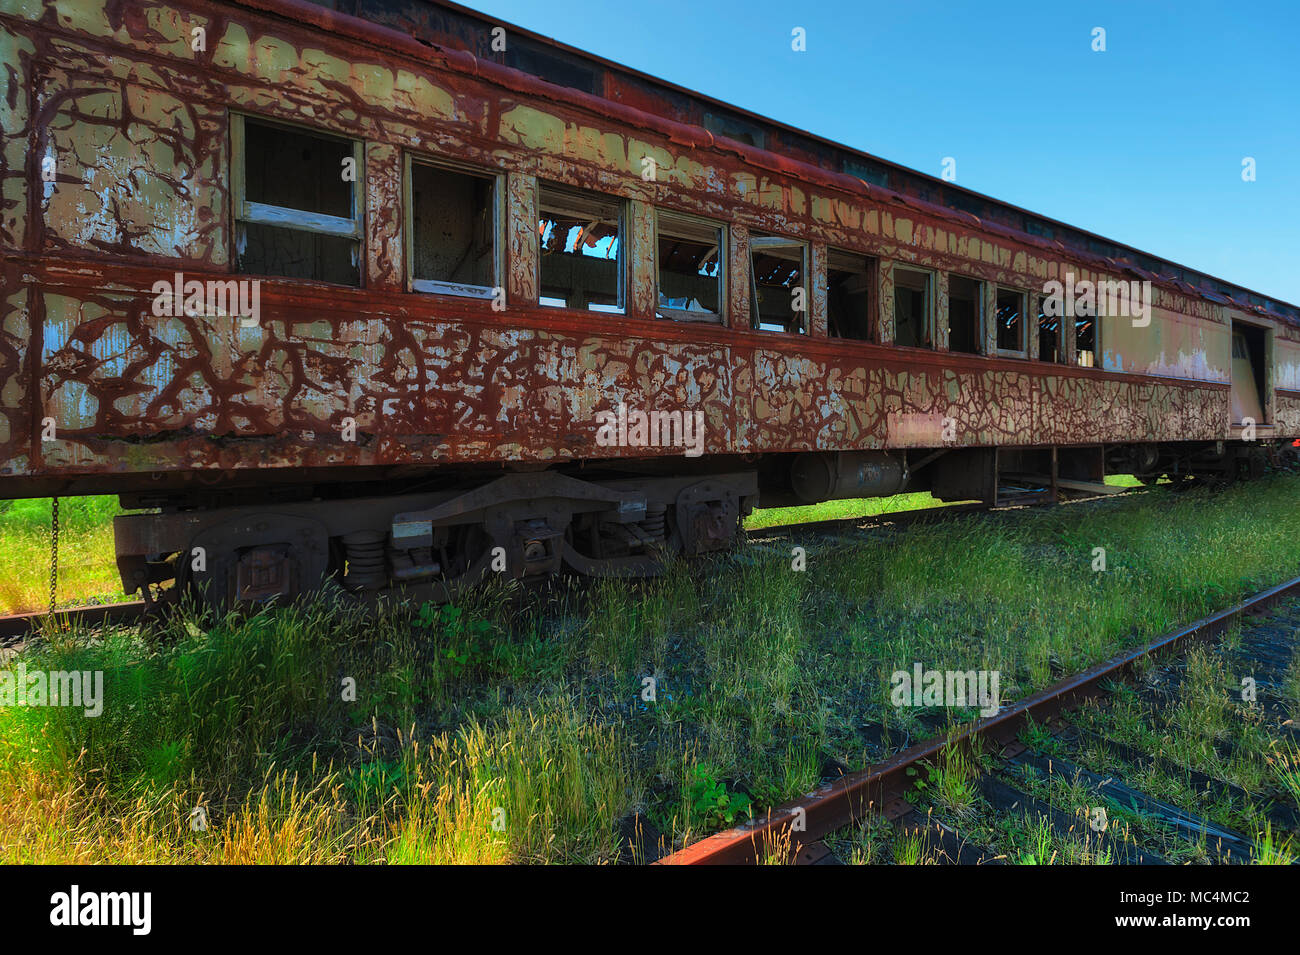 A rusted abandoned passenger rail car sits on likewise train tracks surrounded by weeds and grass. Stock Photo